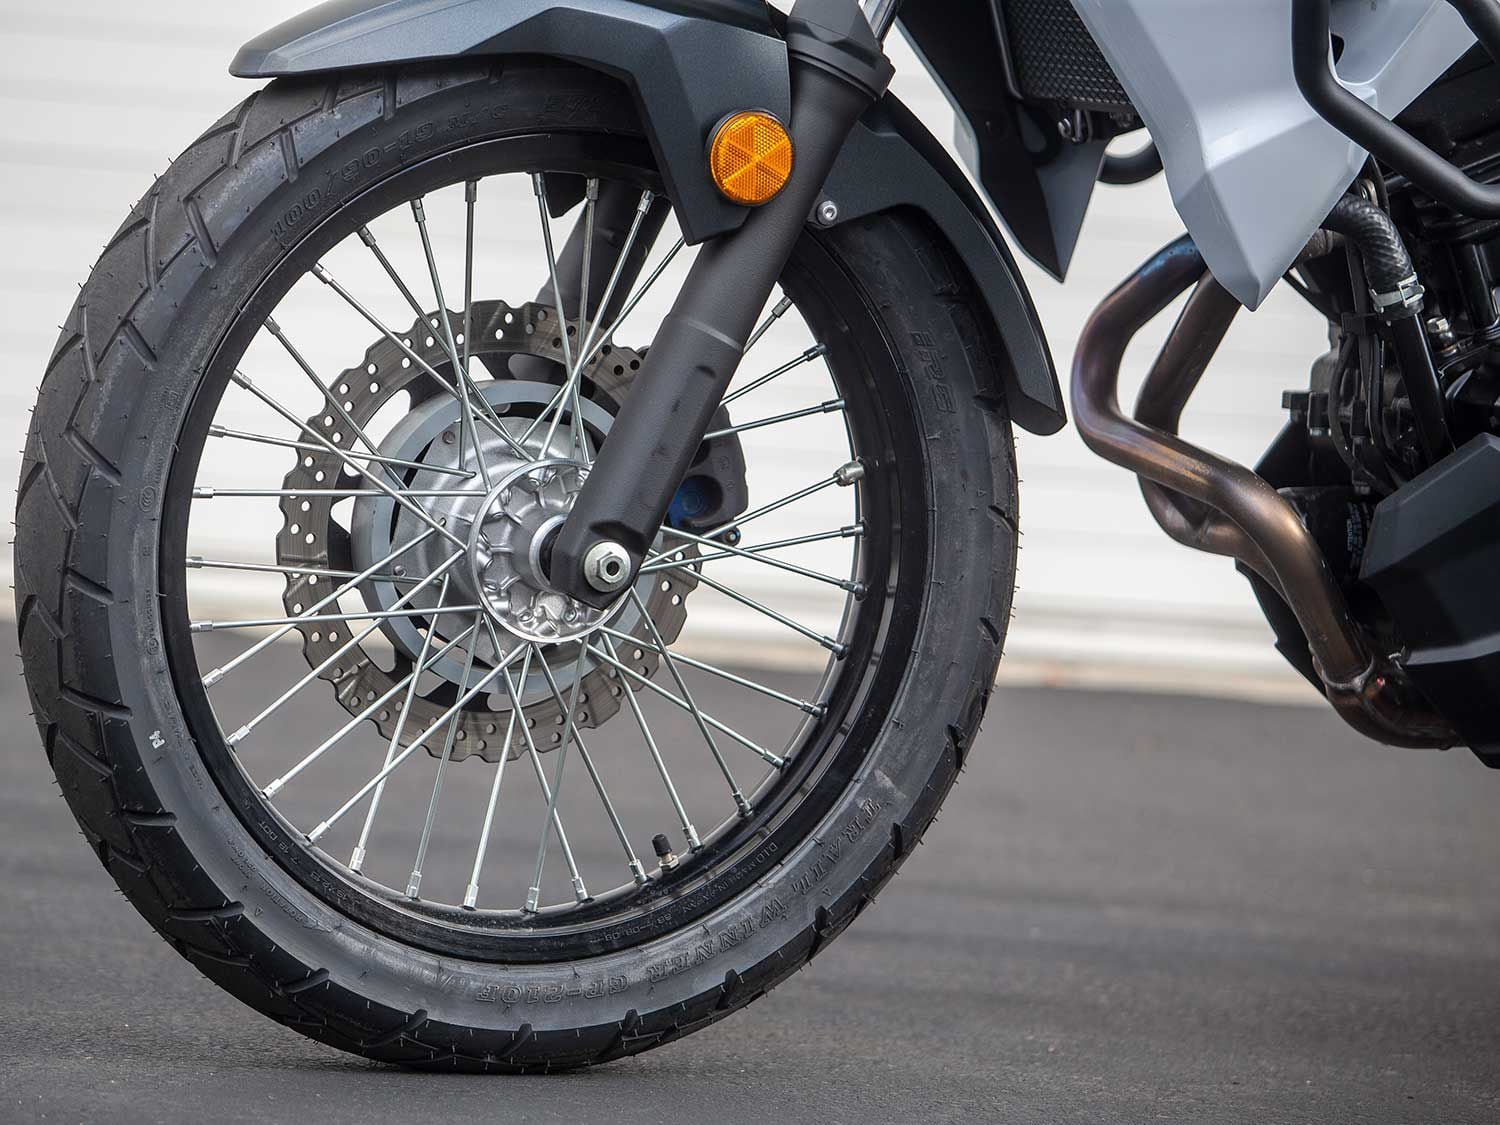 The Versys-X 300 rolls on 19-inch front and 17-inch rear wire-spoked wheels, which makes tire selection broad and easy.